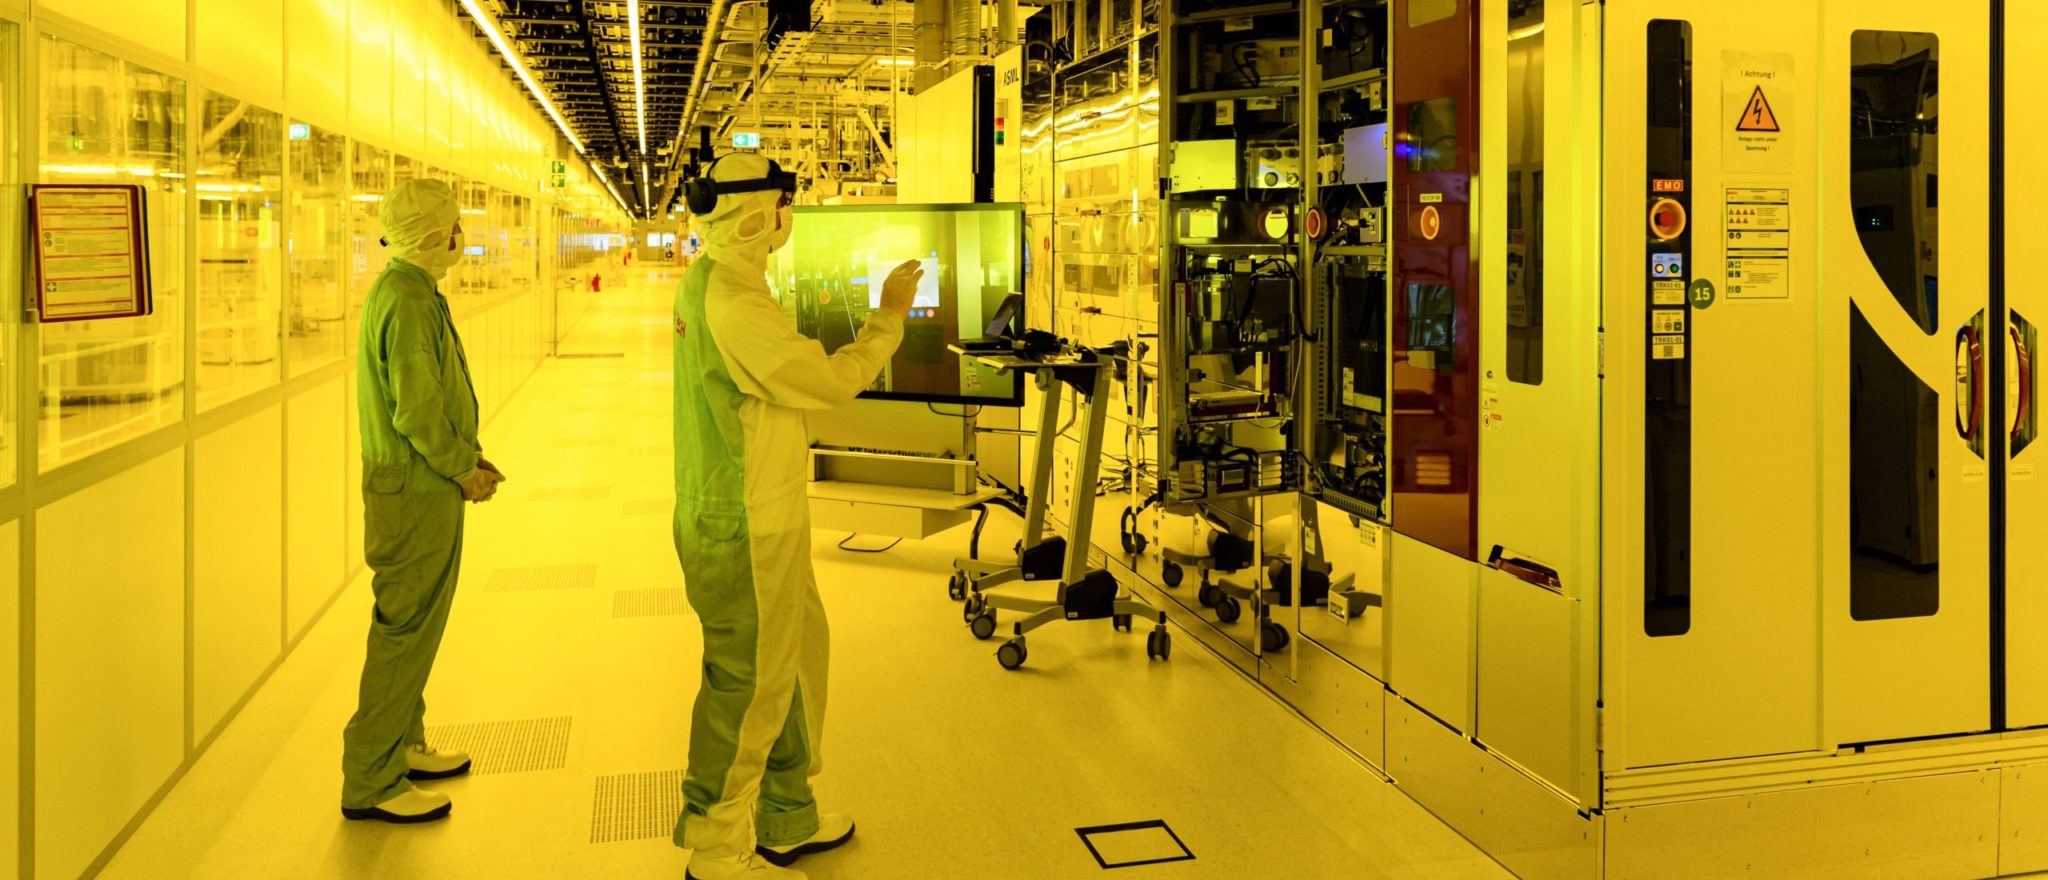  Two workers in protective gear and goggles work in a semiconductor manufacturing plant.